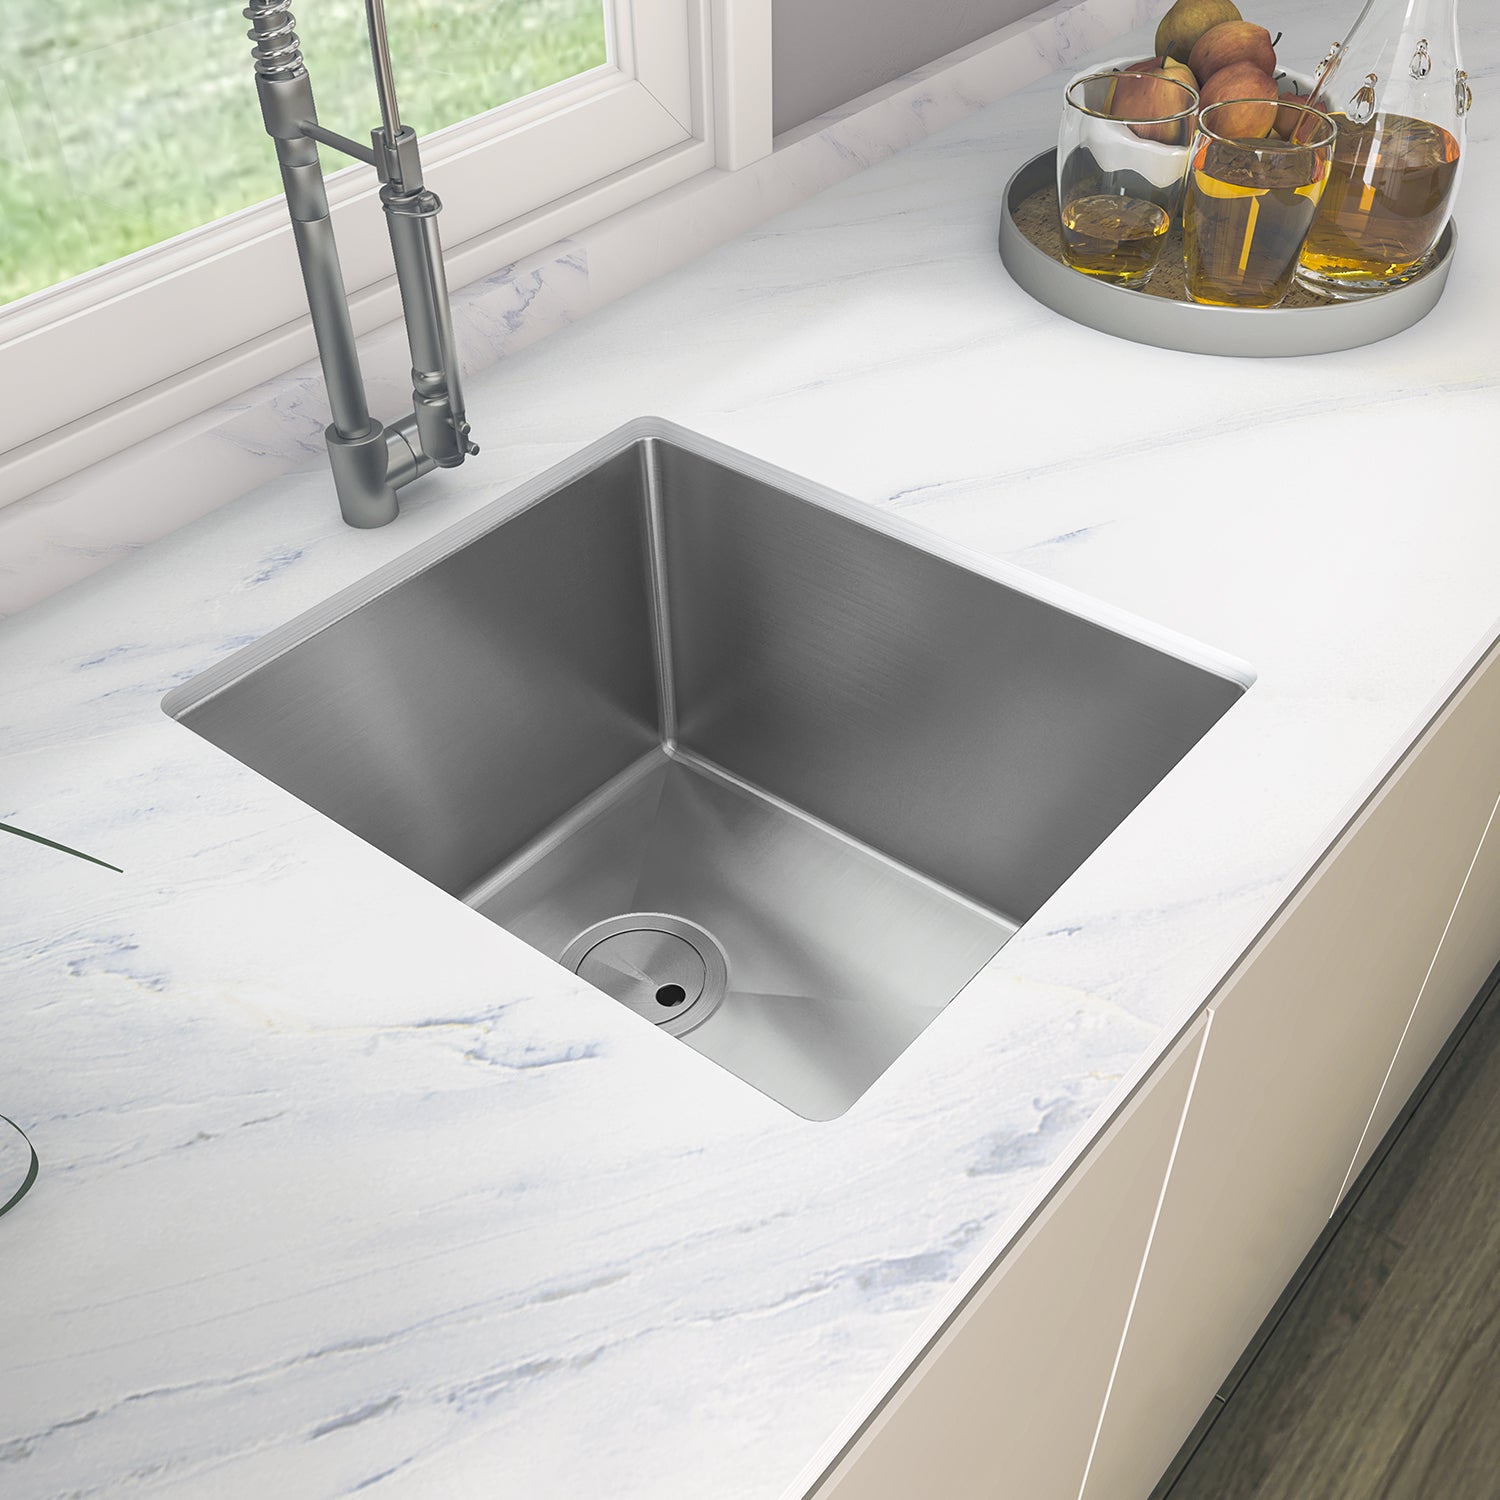 Sinber 16 Inches Undermount Single Bowl Kitchen Sink with 18 Gauge 304 Stainless Steel Satin Finish HU1517S-S